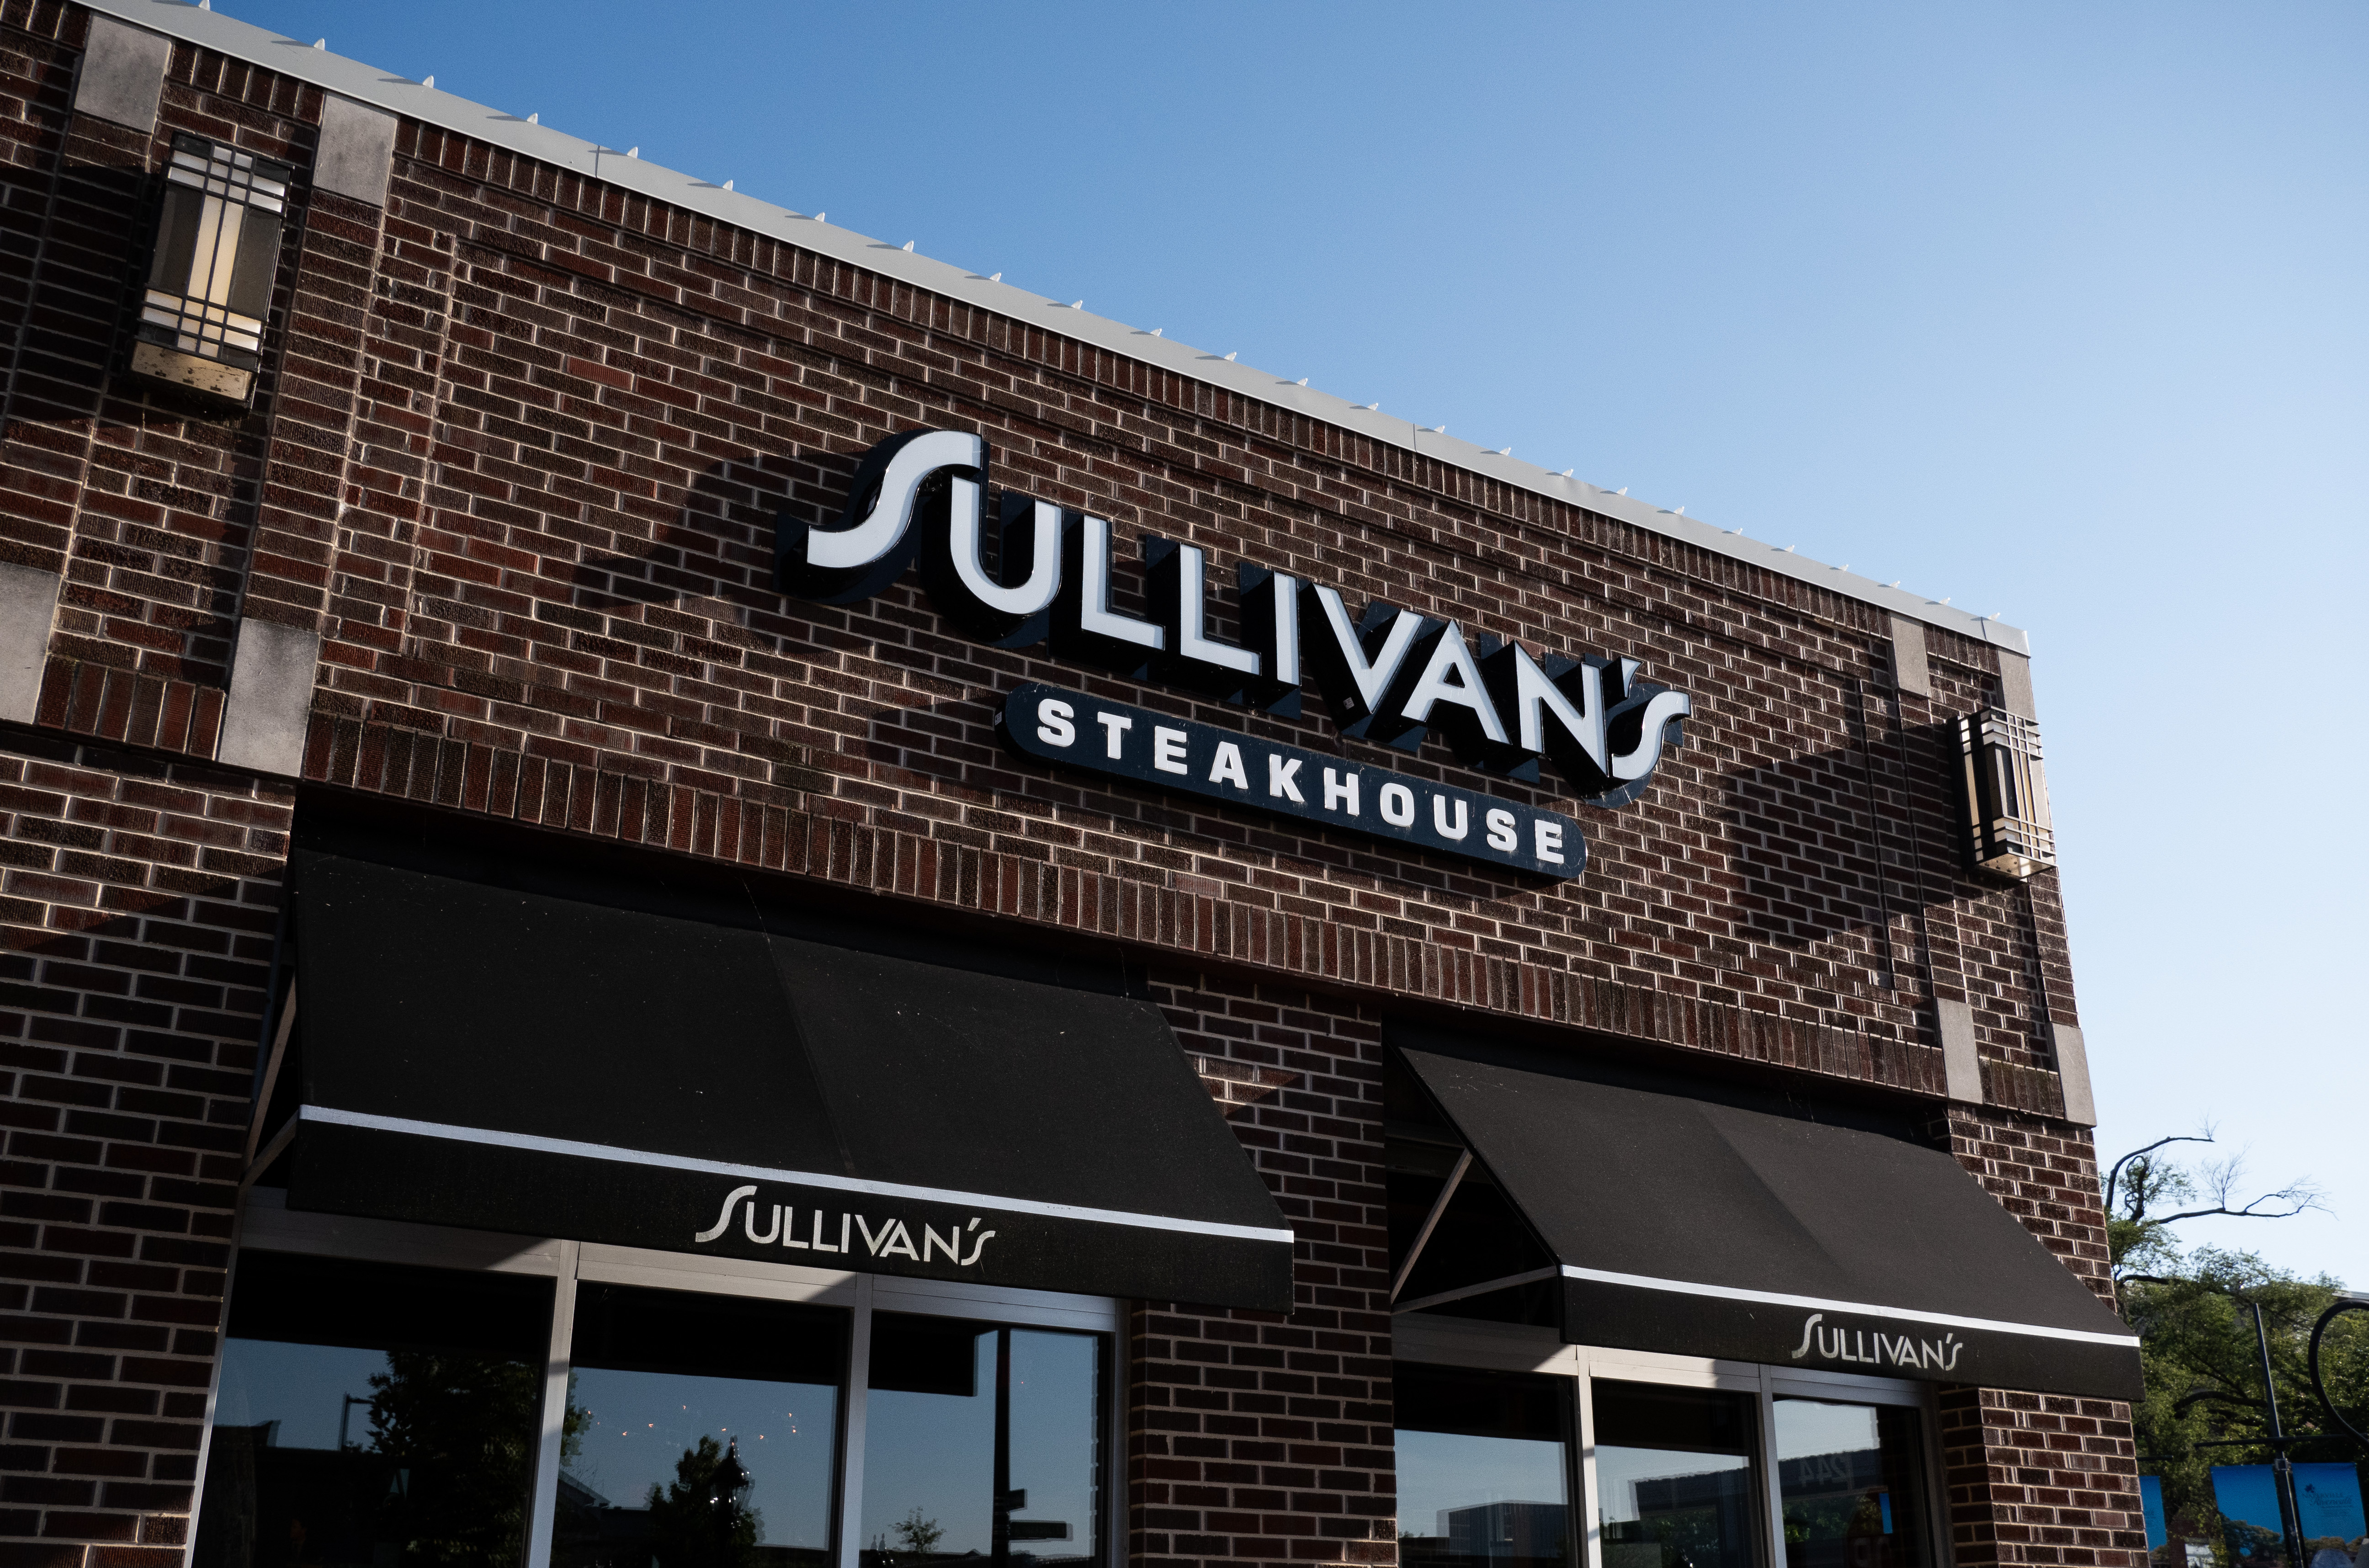 Sullivan's Steakhouse at 244 S. Main St. was one of four Naperville restaurants to receive an award of excellence from the magazine Wine Spectator this year for the caliber of their wine programs. (Tess Kenny/Naperville Sun)